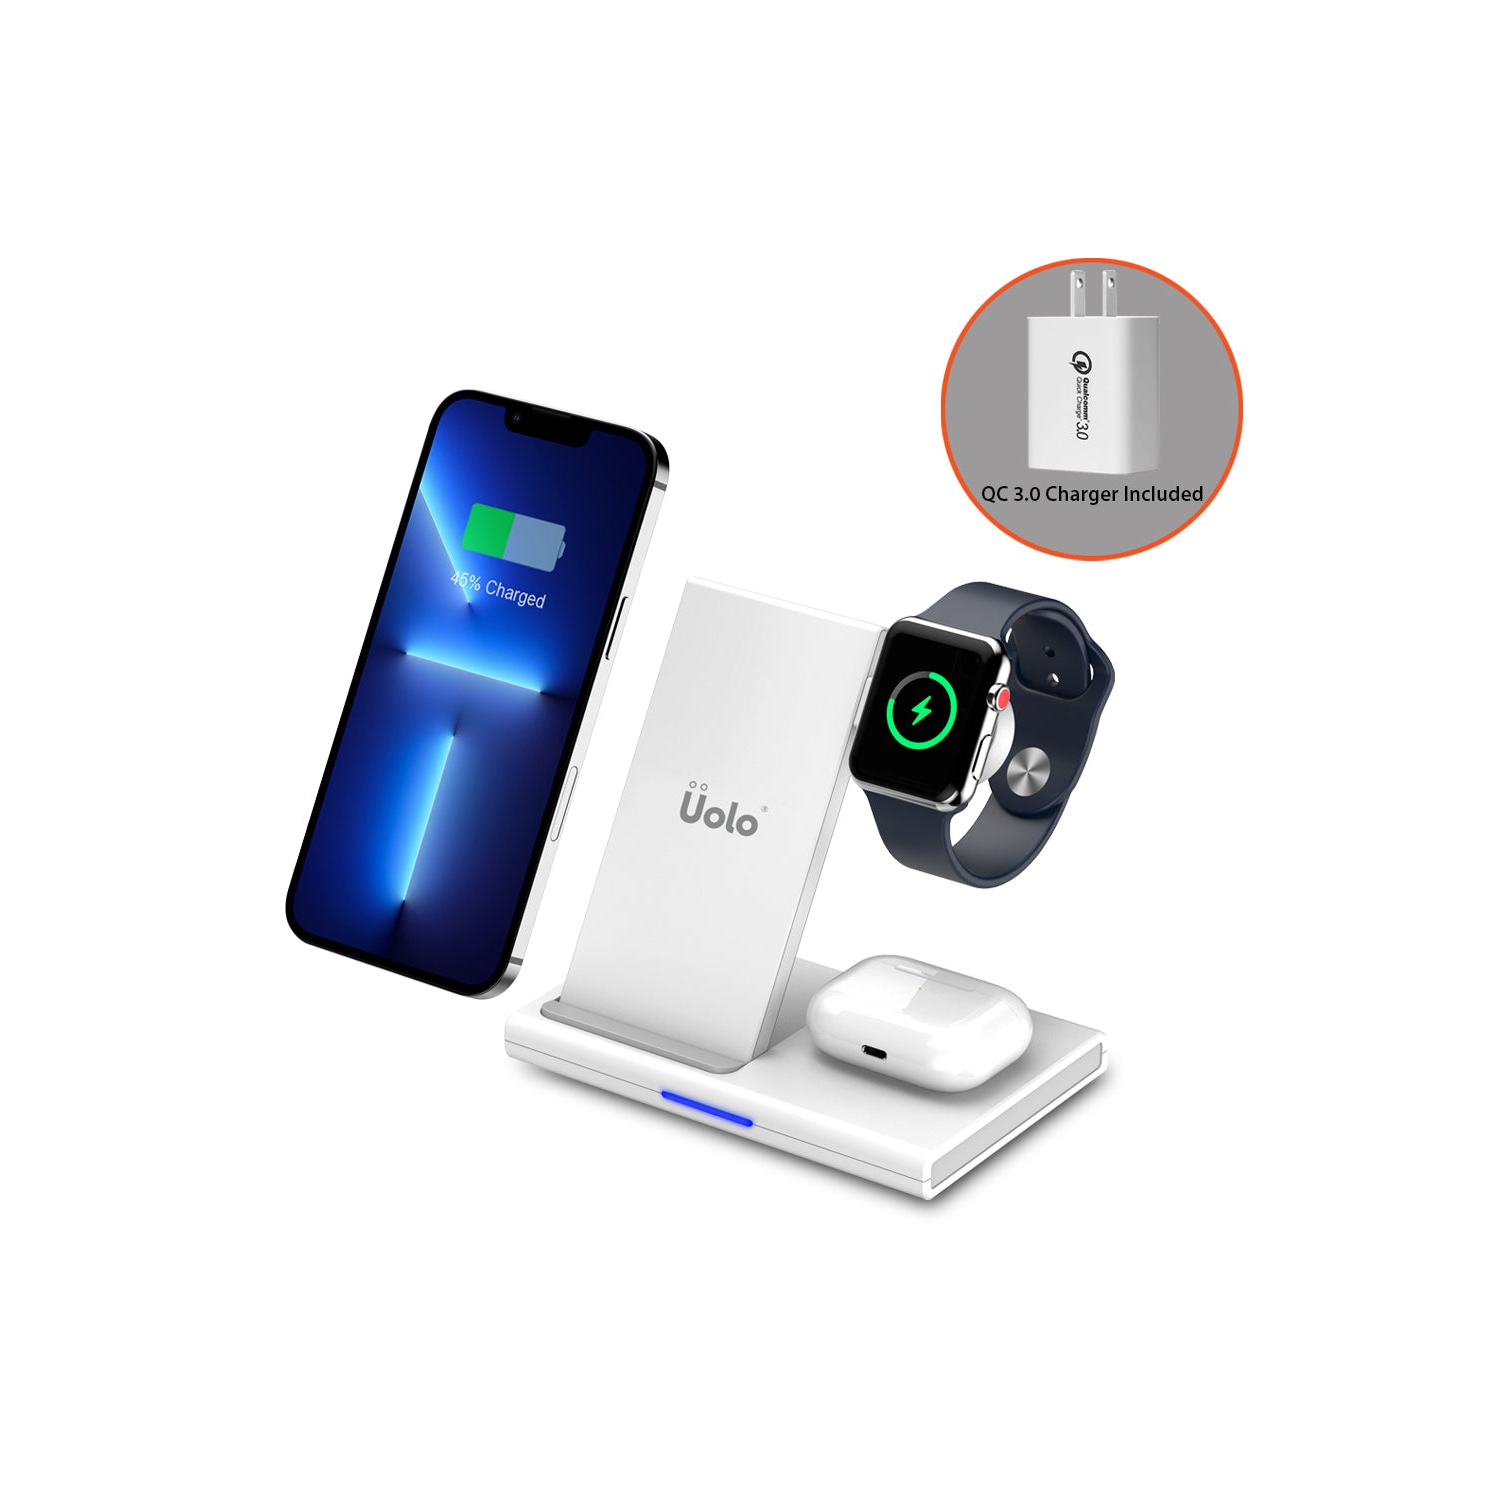 Uolo Volt 3-in-1 Fast Wireless Charging Stand Station for iPhone, Apple Watch Series 1, 2, 3, 4, 5, 6, SE, and AirPods Pro - with QC 3.0 Wall Charger